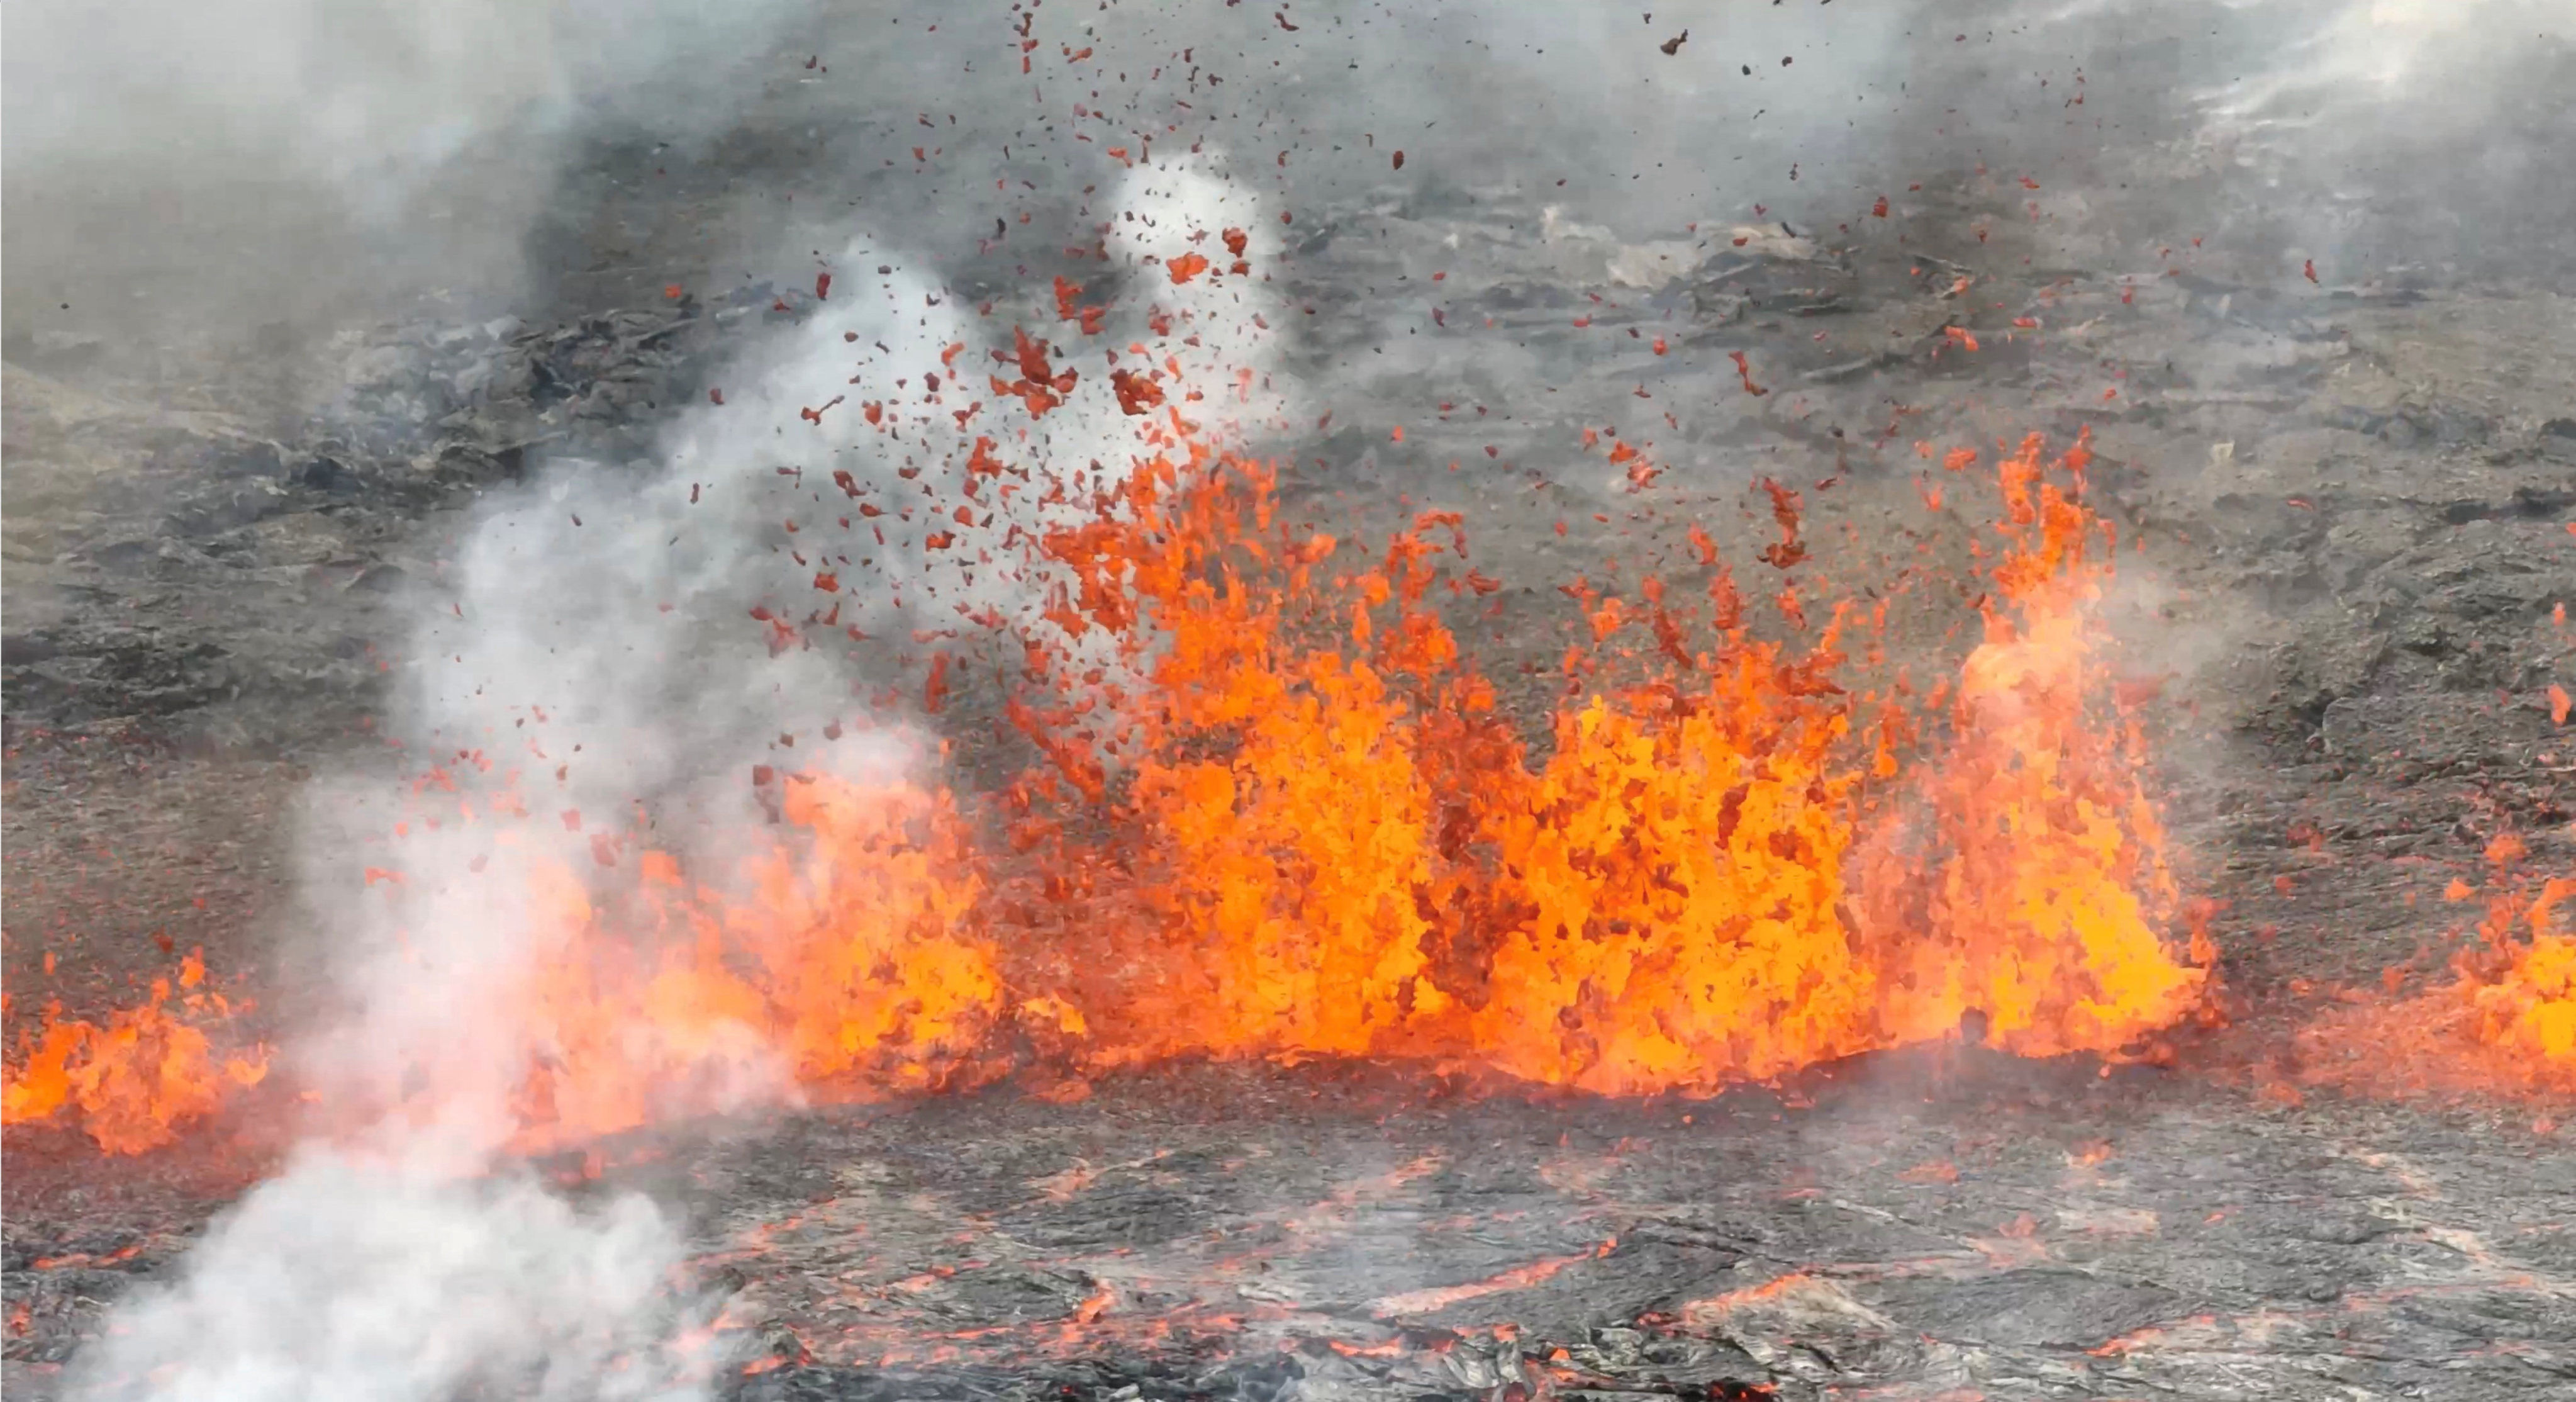 Lava spurts after the eruption of a volcano, on the Reykjanes peninsula, near the capital Reykjavik, in southwest Iceland on Monday. Photo: Juergen Merz via Reuters